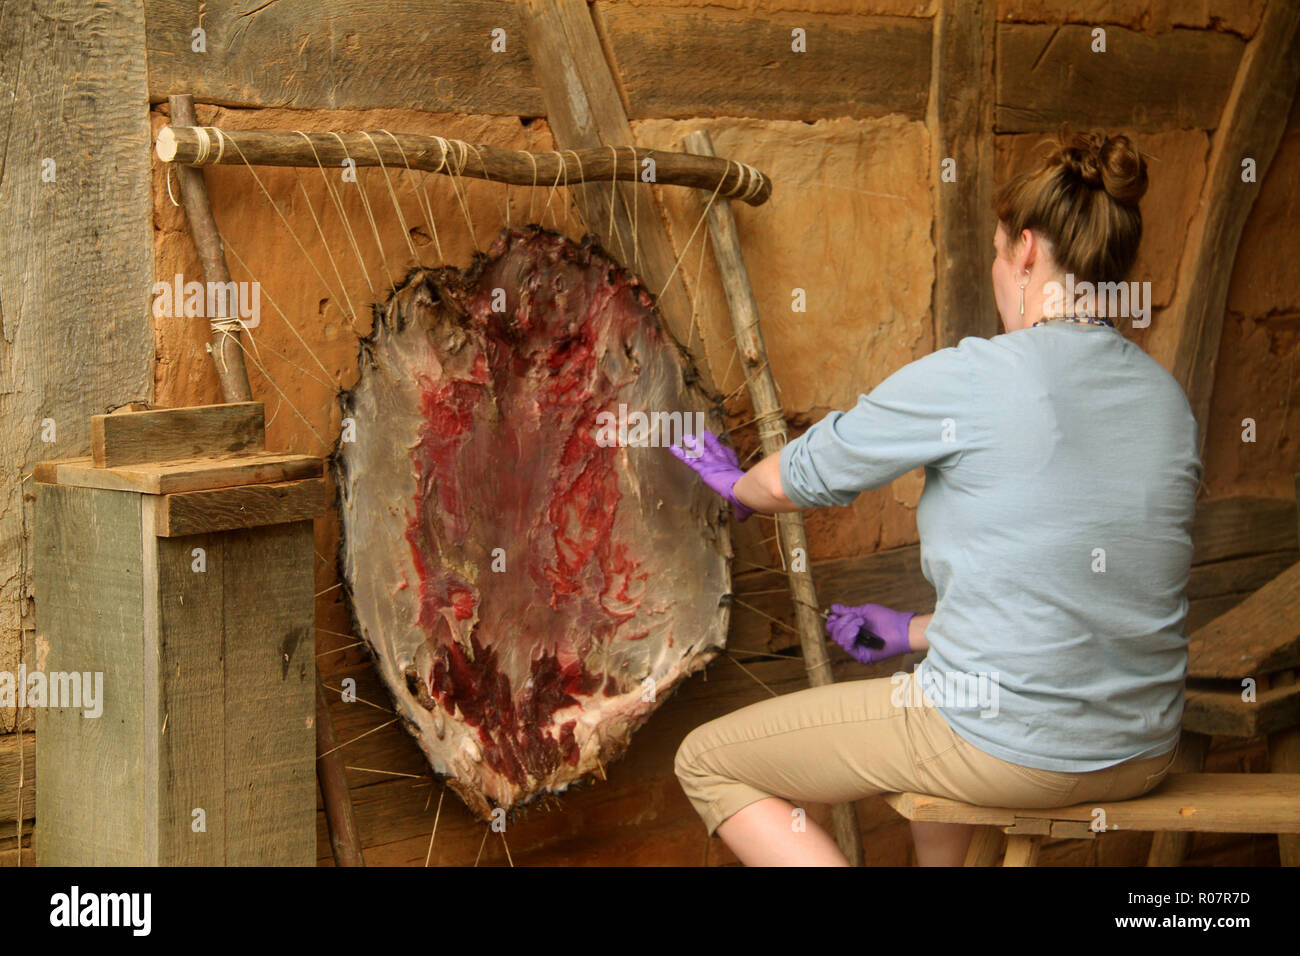 Woman demonstrating the traditional tanning process at the frontier Culture Museum in Staunton, VA Stock Photo